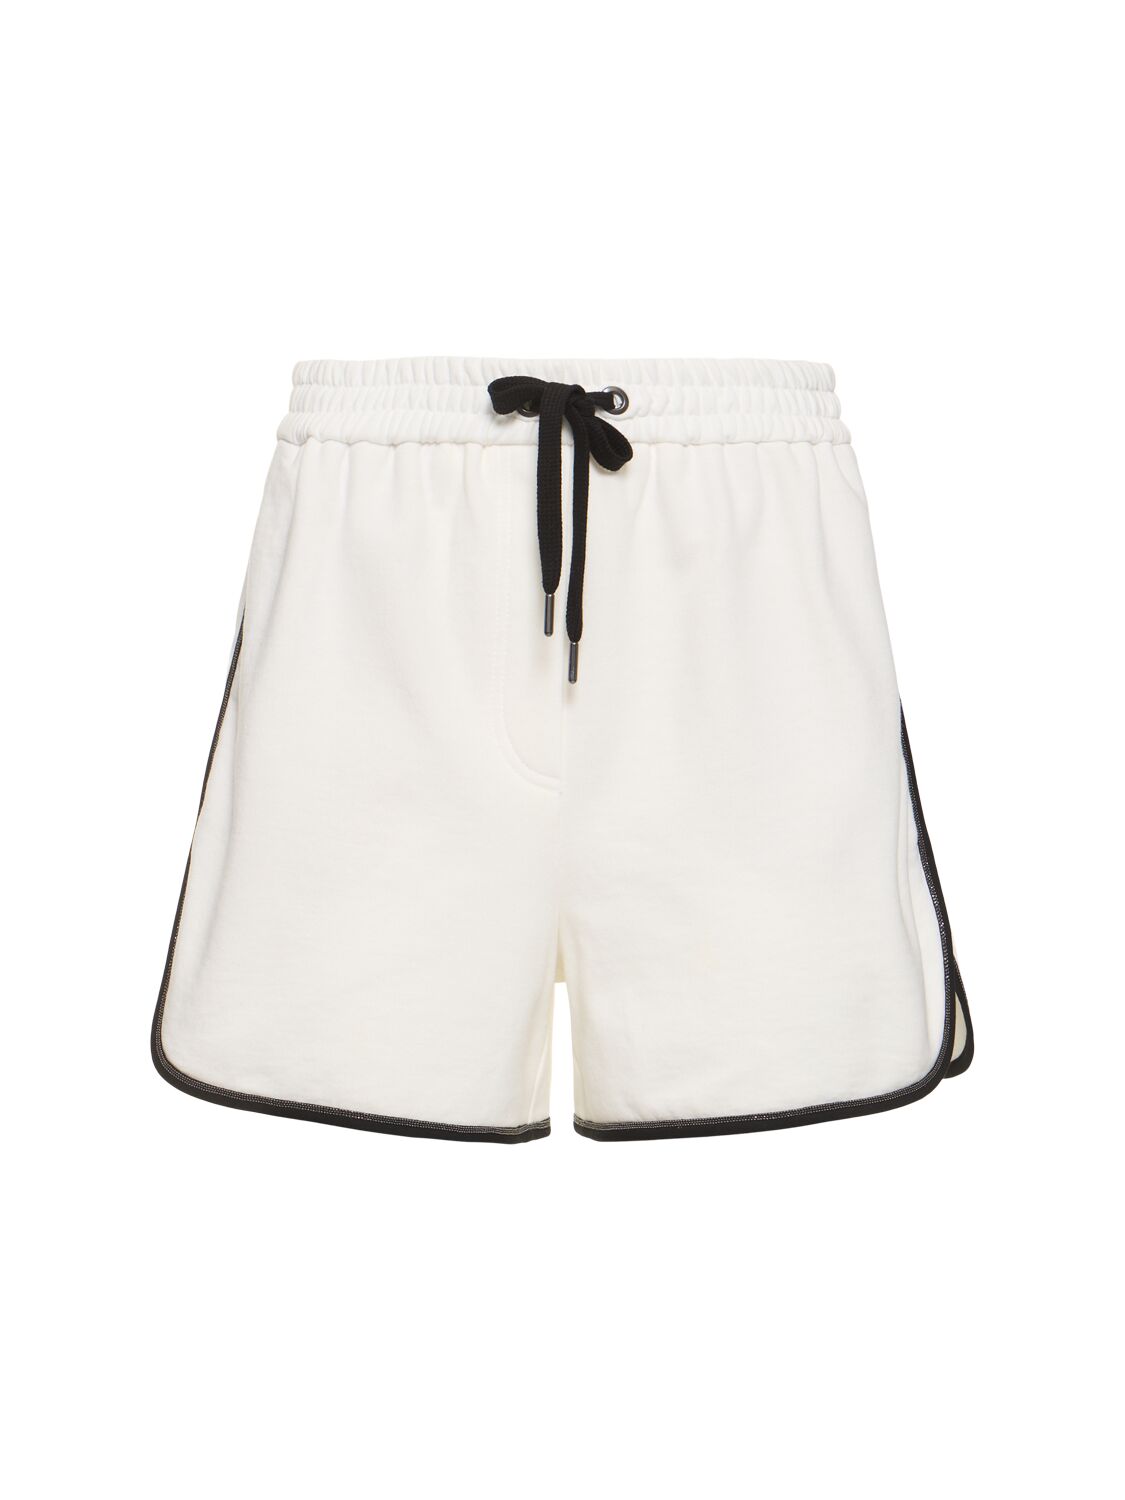 Image of Cotton Jersey Shorts